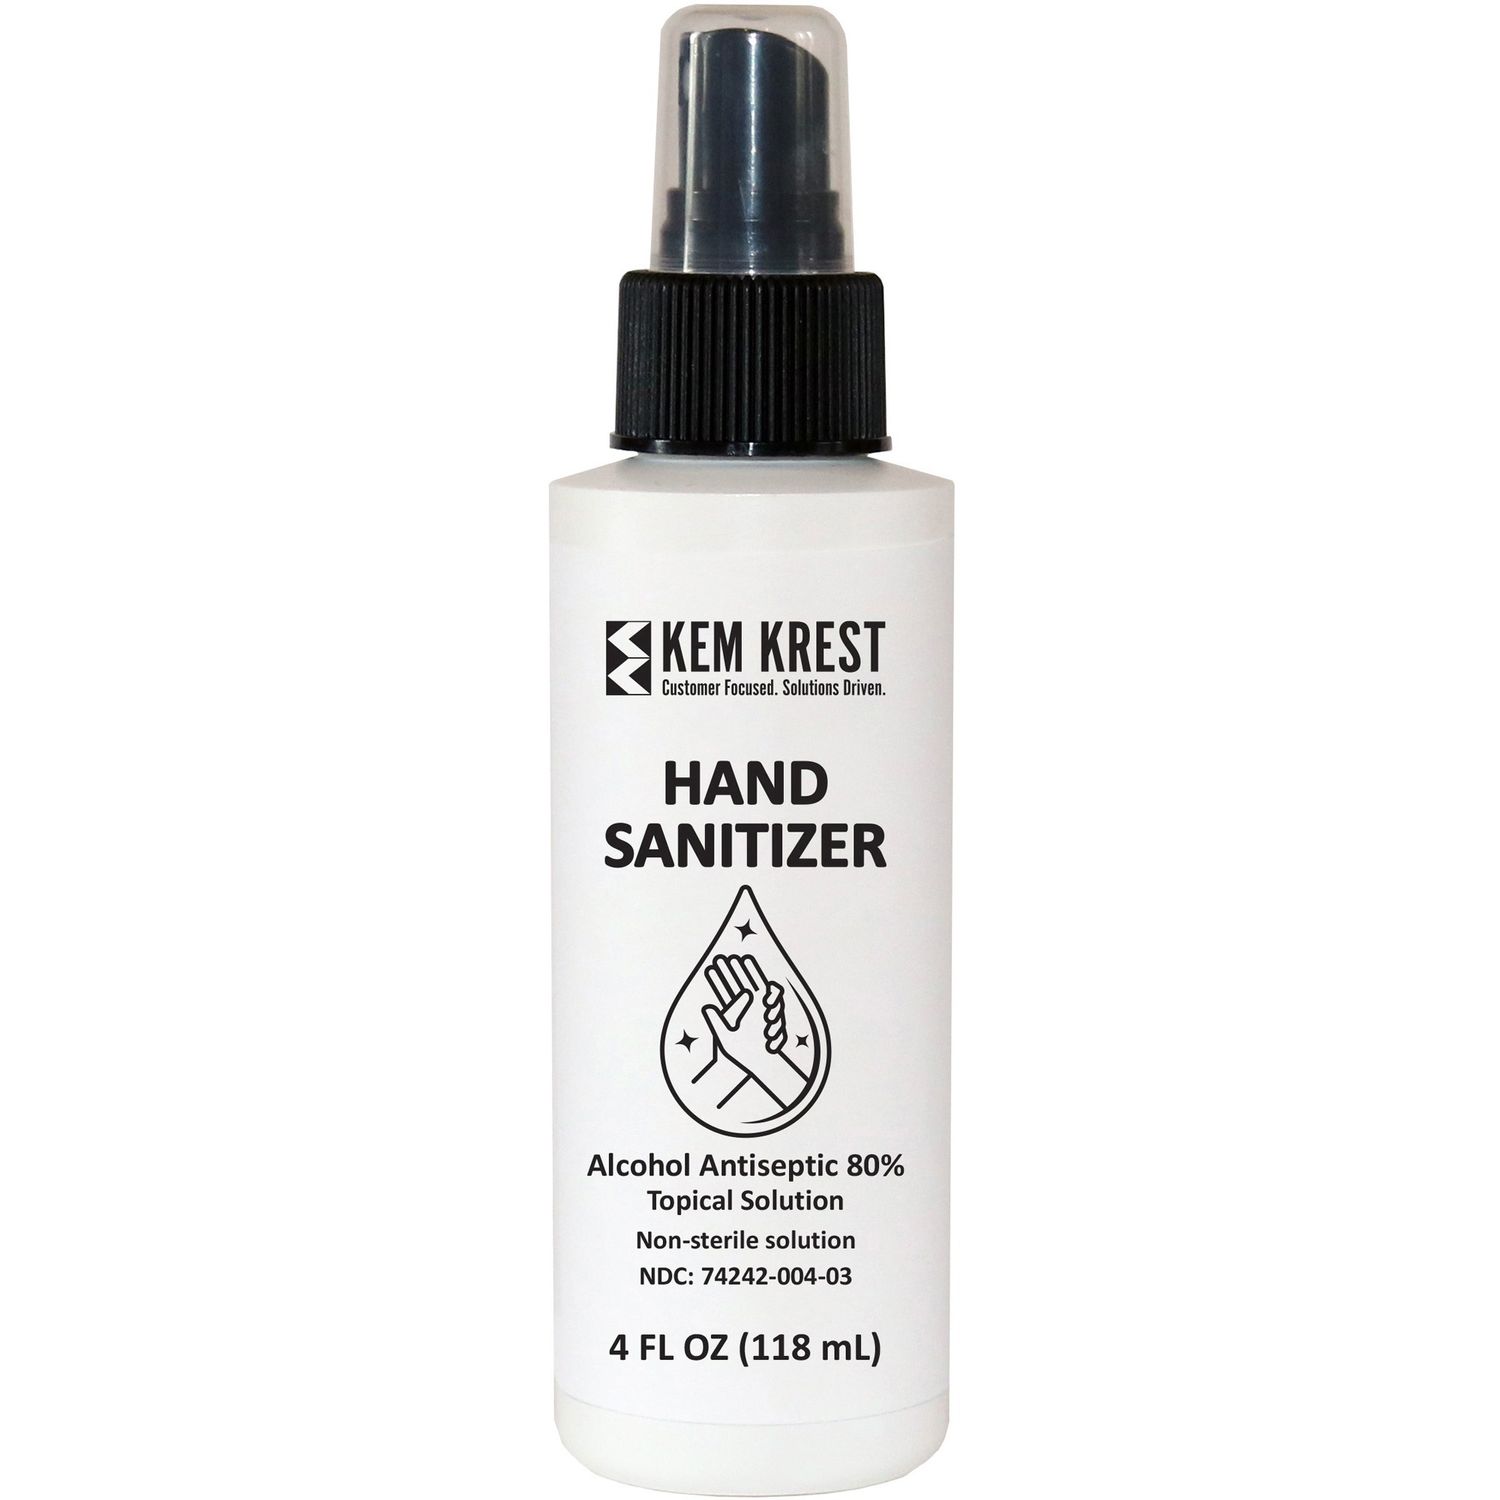 Hand Sanitizer Spray 4 fl oz (118.3 mL), Kill Germs, Hand, Clear, Quick Drying, Fast Acting, 1 / Each